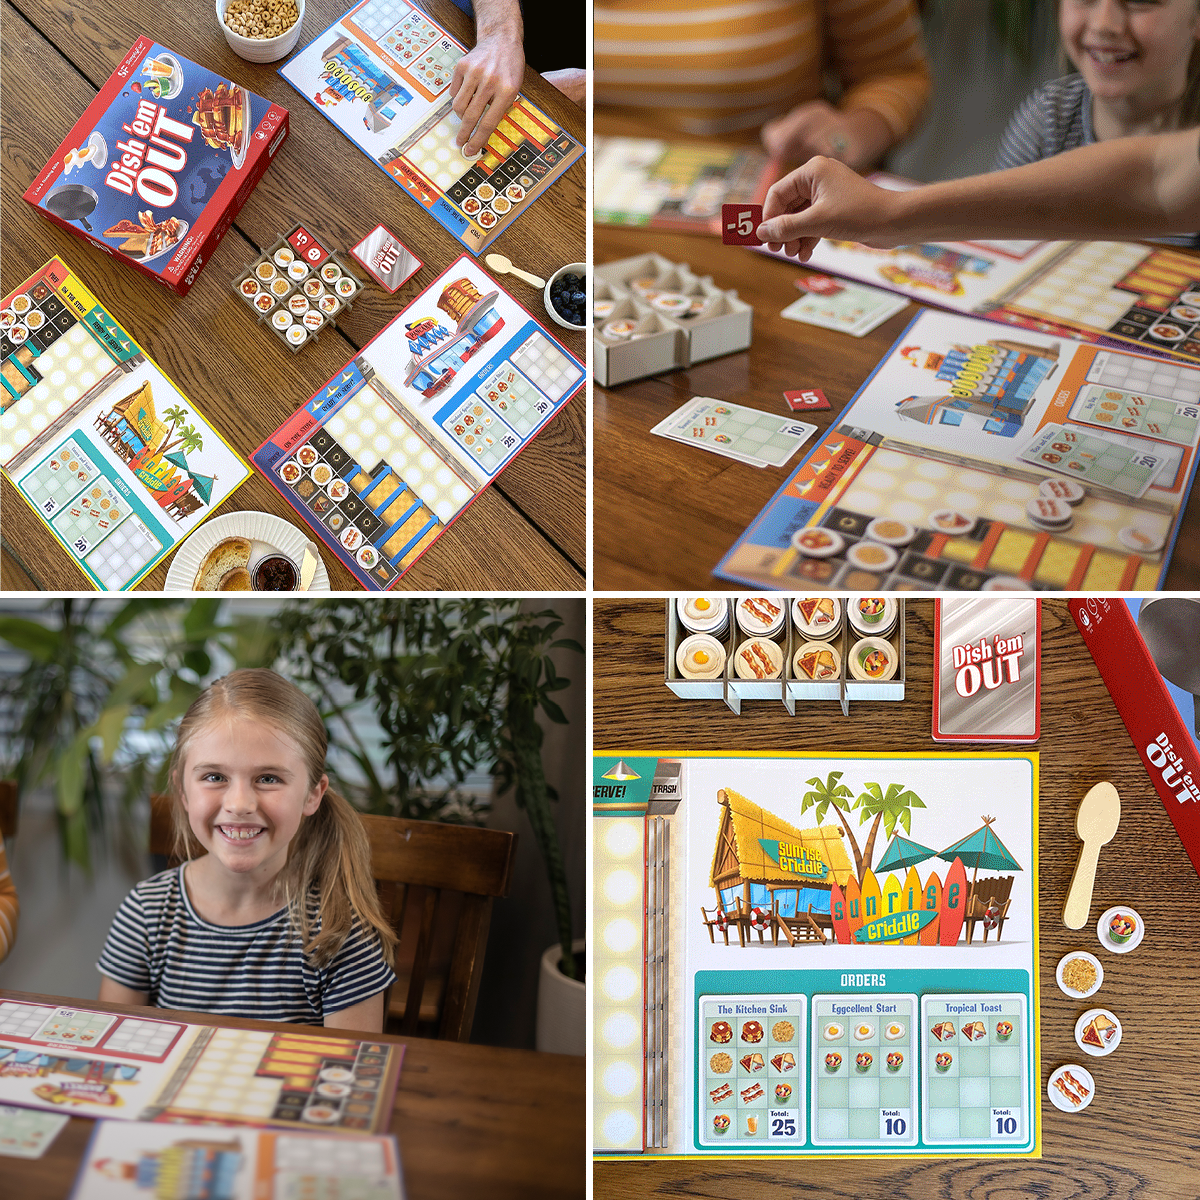 Dish 'em Out: diner-themed strategy board game